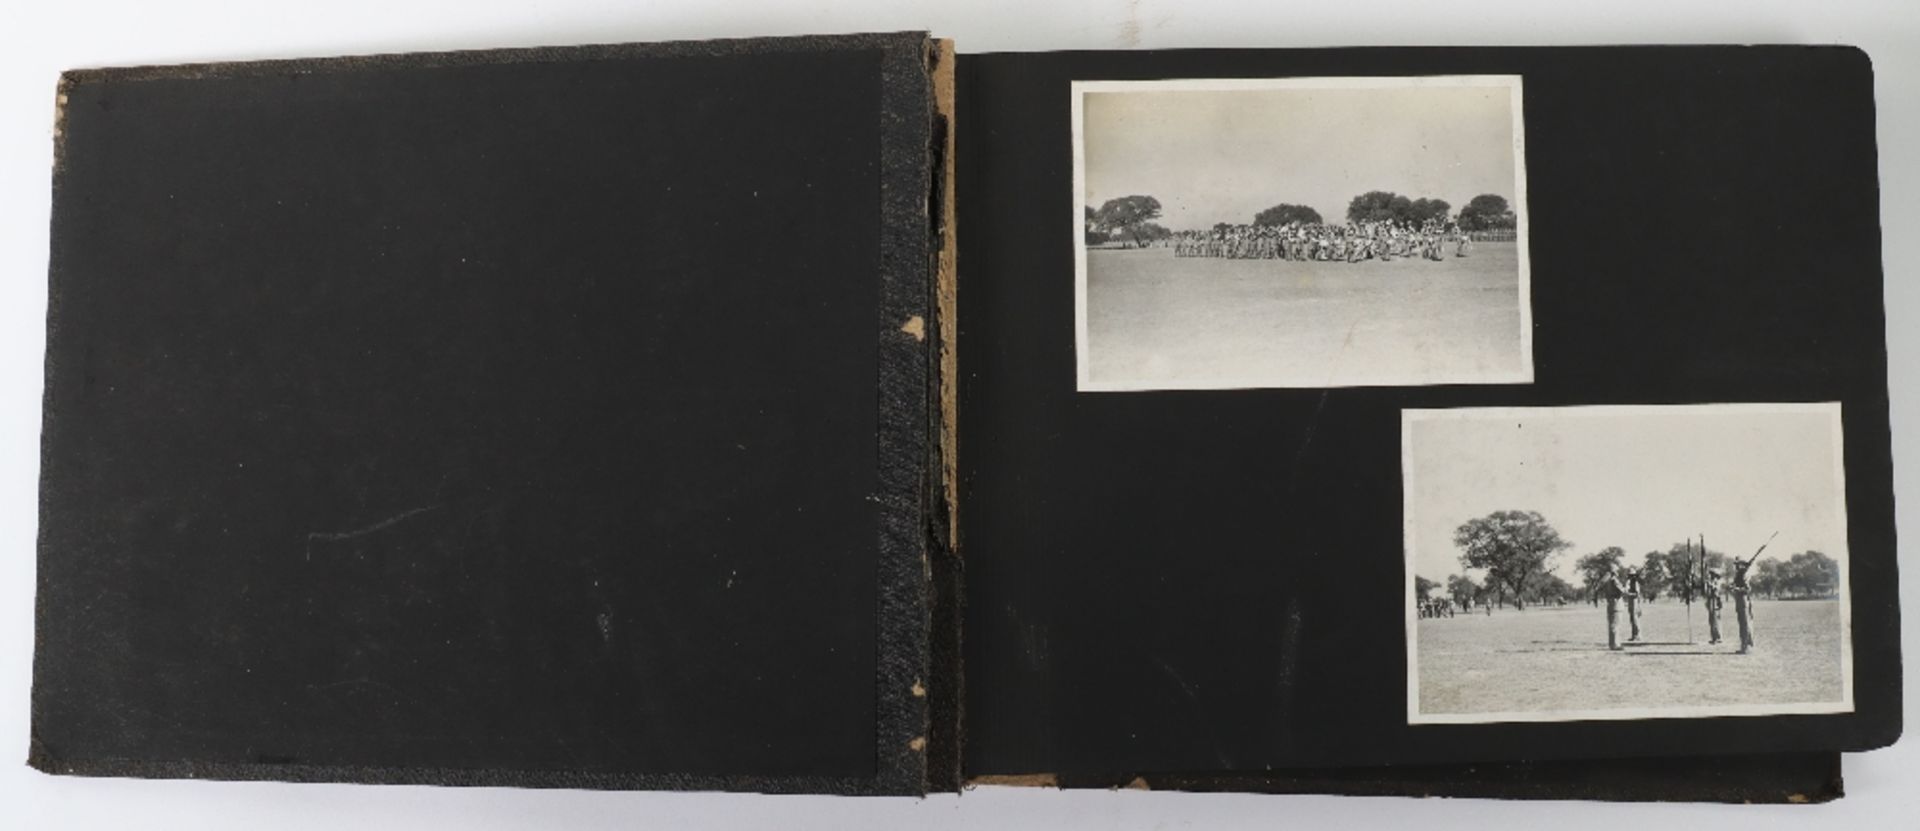 1930’s Dorsetshire Regiment Photograph Album in India and North West Frontier - Image 11 of 12